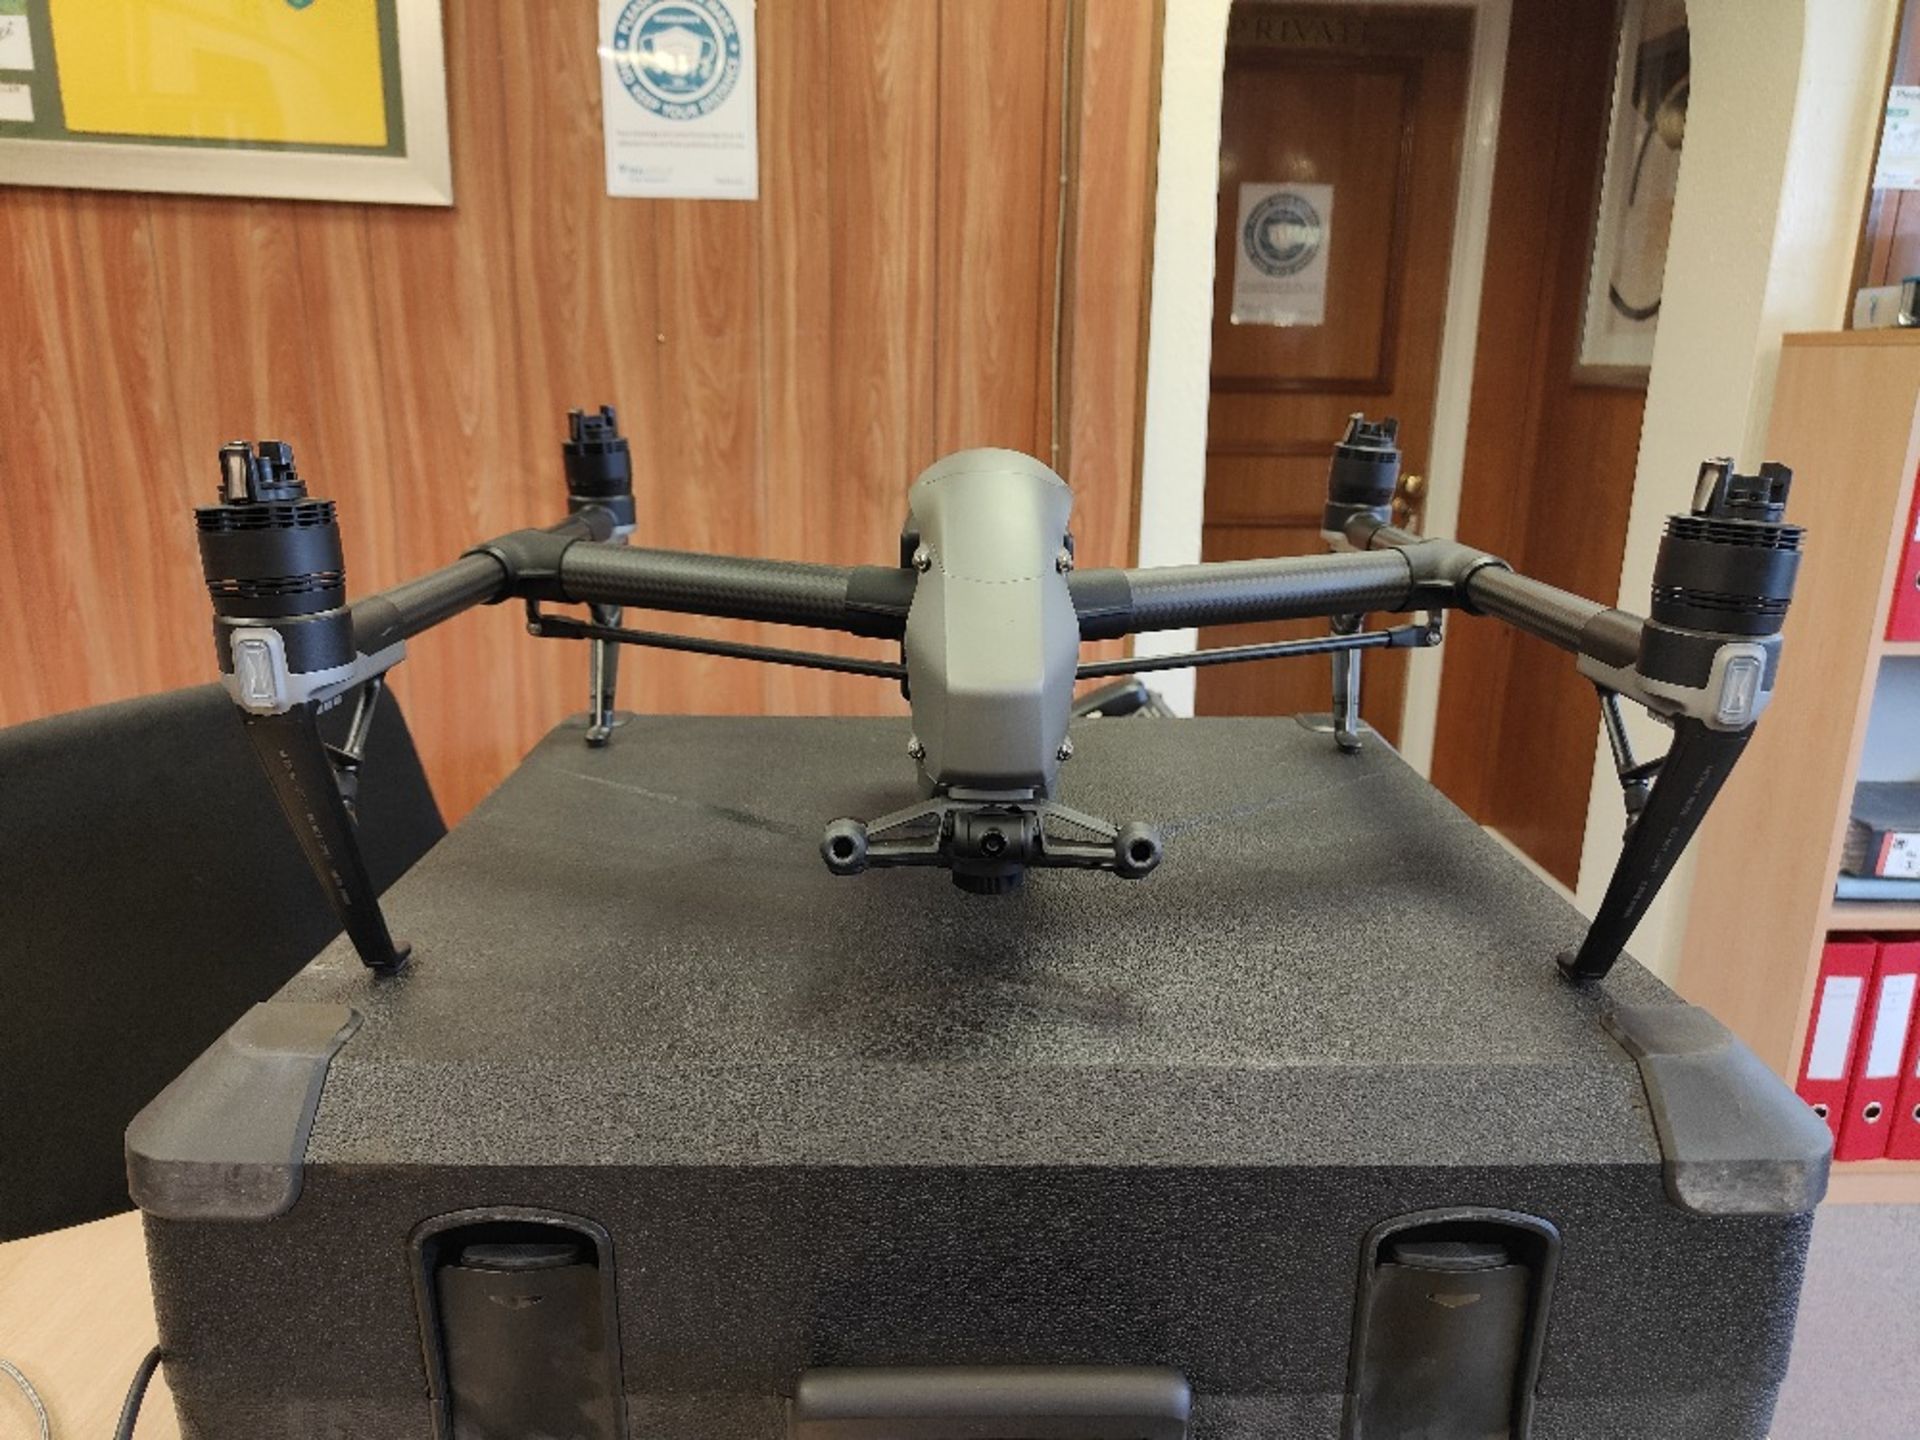 DJI Inspire 2 Drone w/ DJI Zenmuse X5s and Accessories - Image 13 of 18